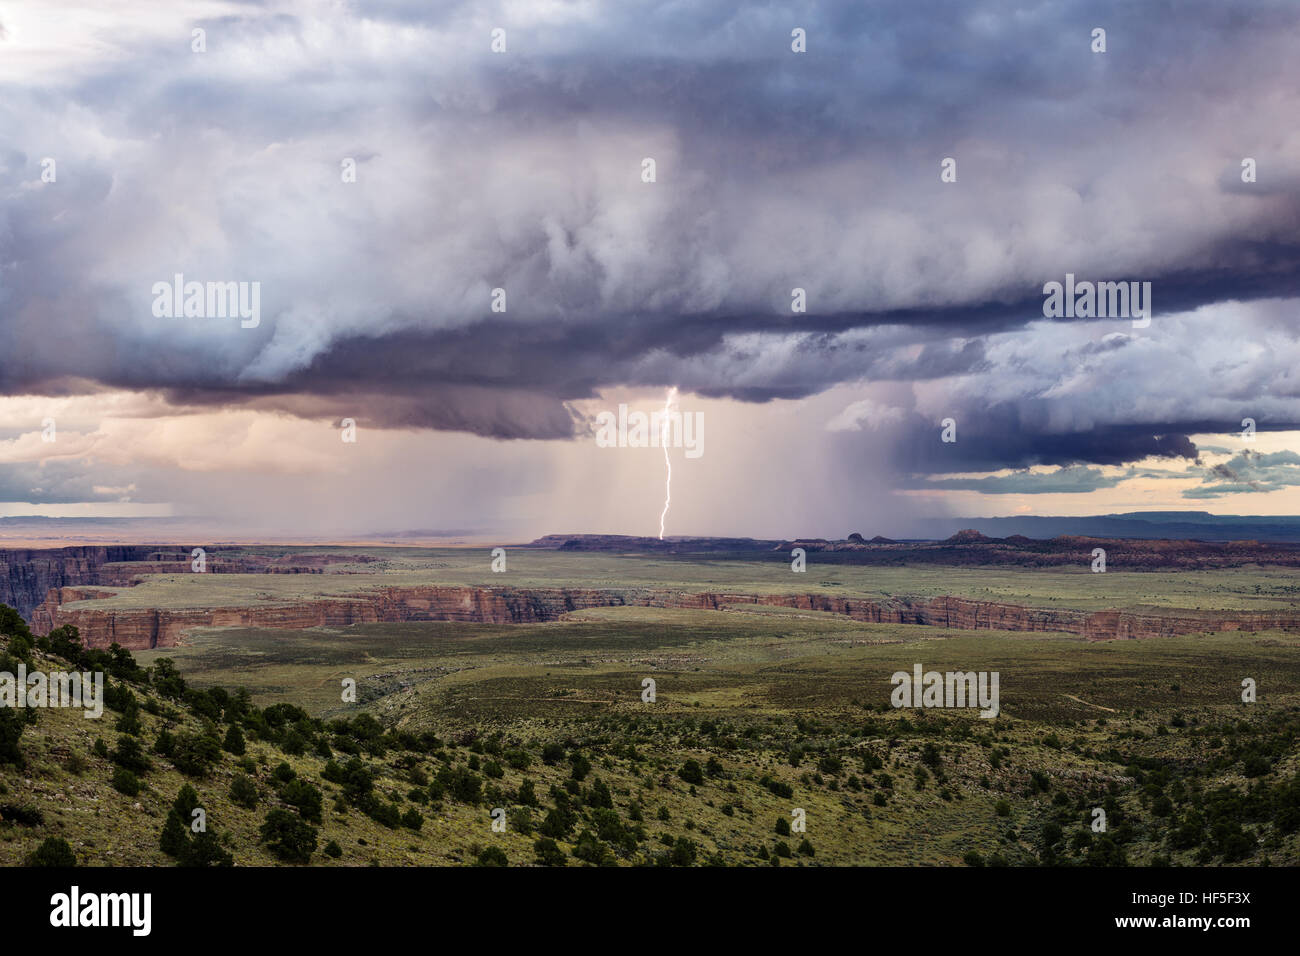 Distant lightning strike dramatic storm clouds over the Little Colorado River valley during a summer thunderstorm Stock Photo